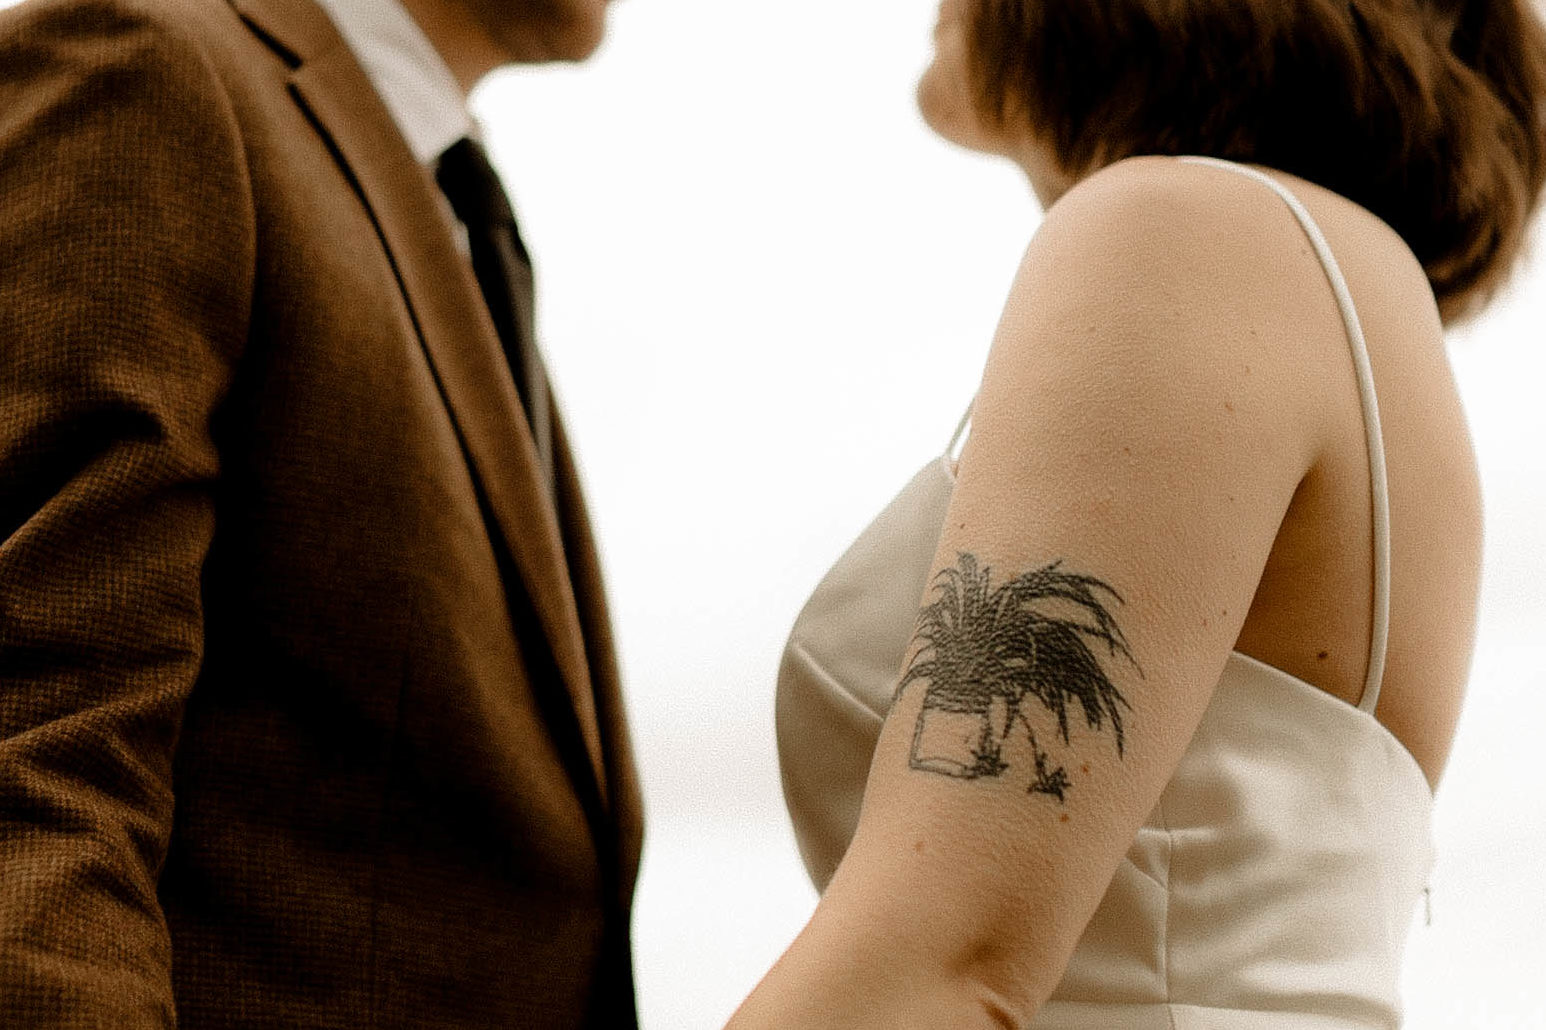 Goosebumps and tattoos for this winter PNW elopement. 